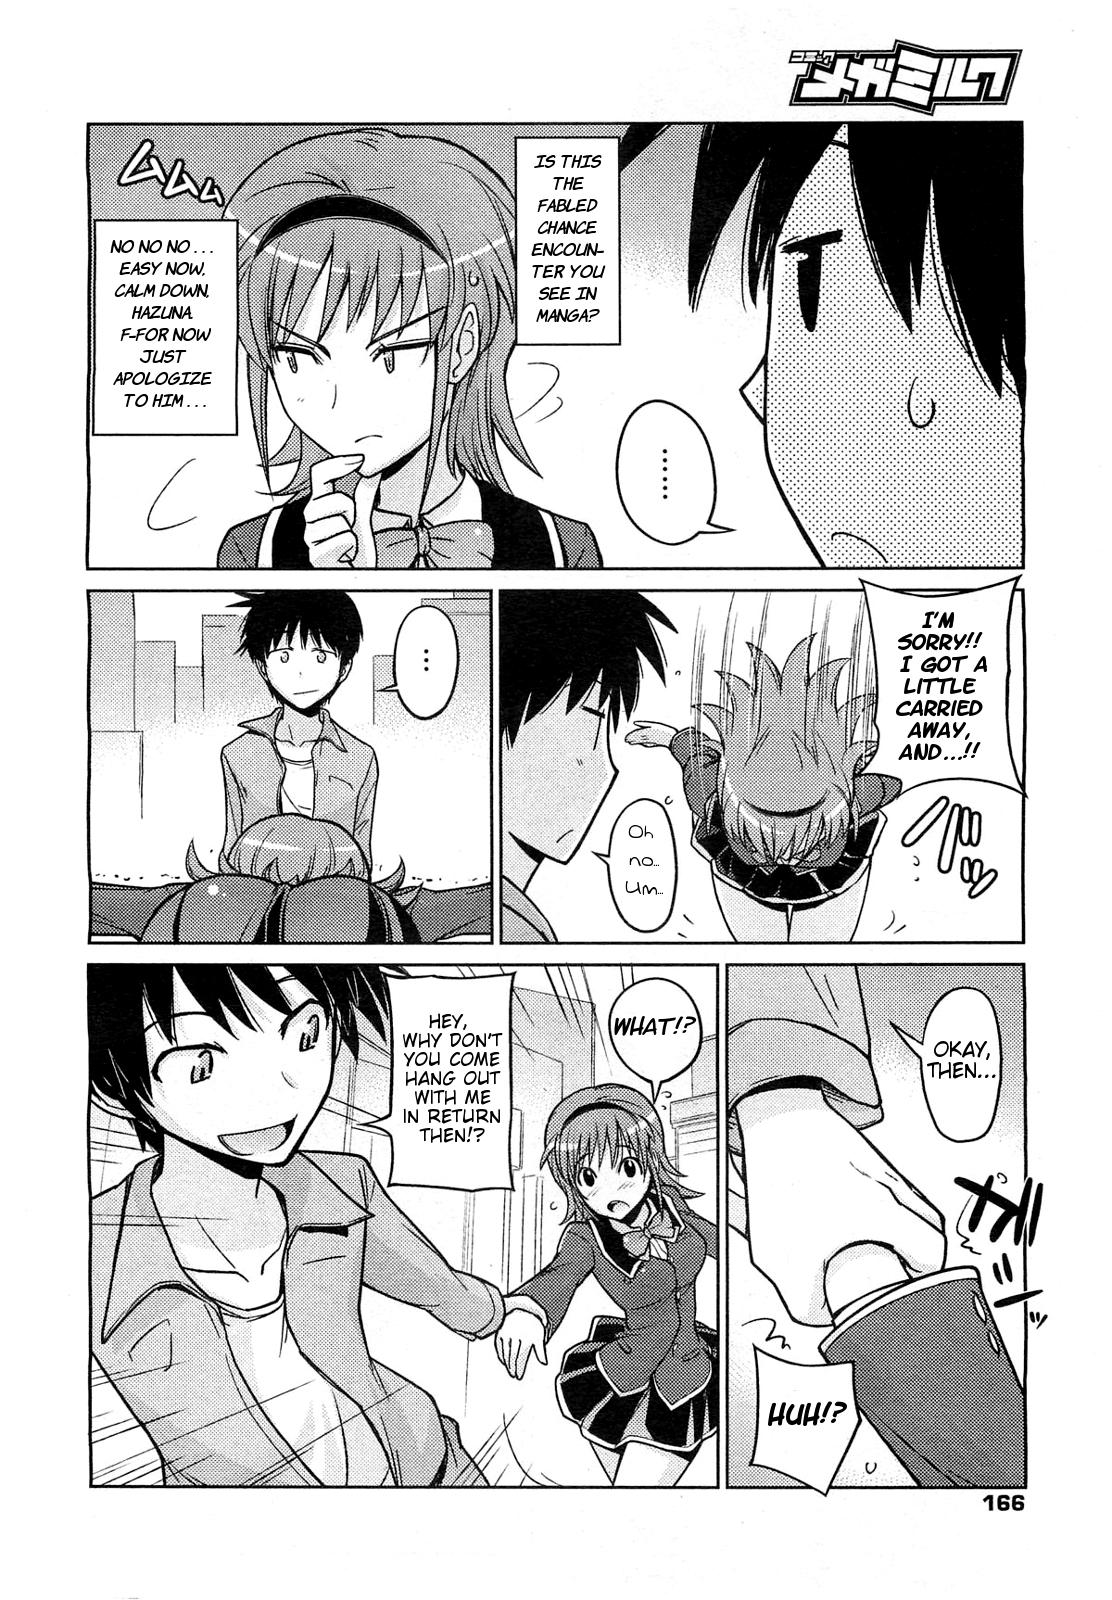 Jacking [Umiushi] Let's Play With a High School (?) Girl!! [English] =TV+L4K= Assfucking - Page 4